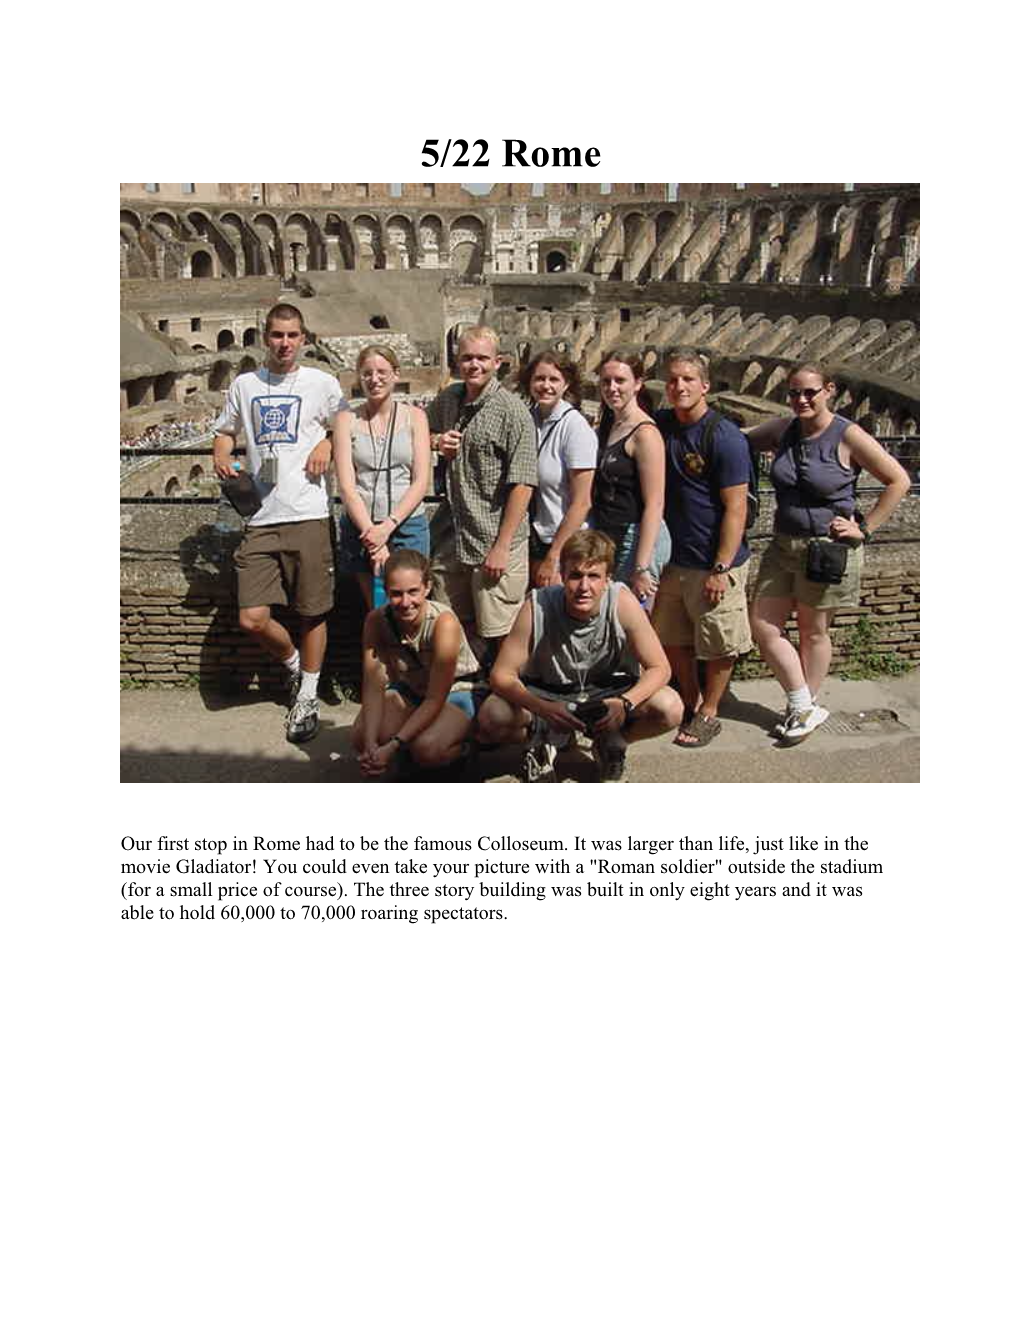 Our First Stop in Rome Had to Be the Famous Colloseum. It Was Larger Than Life, Just Like